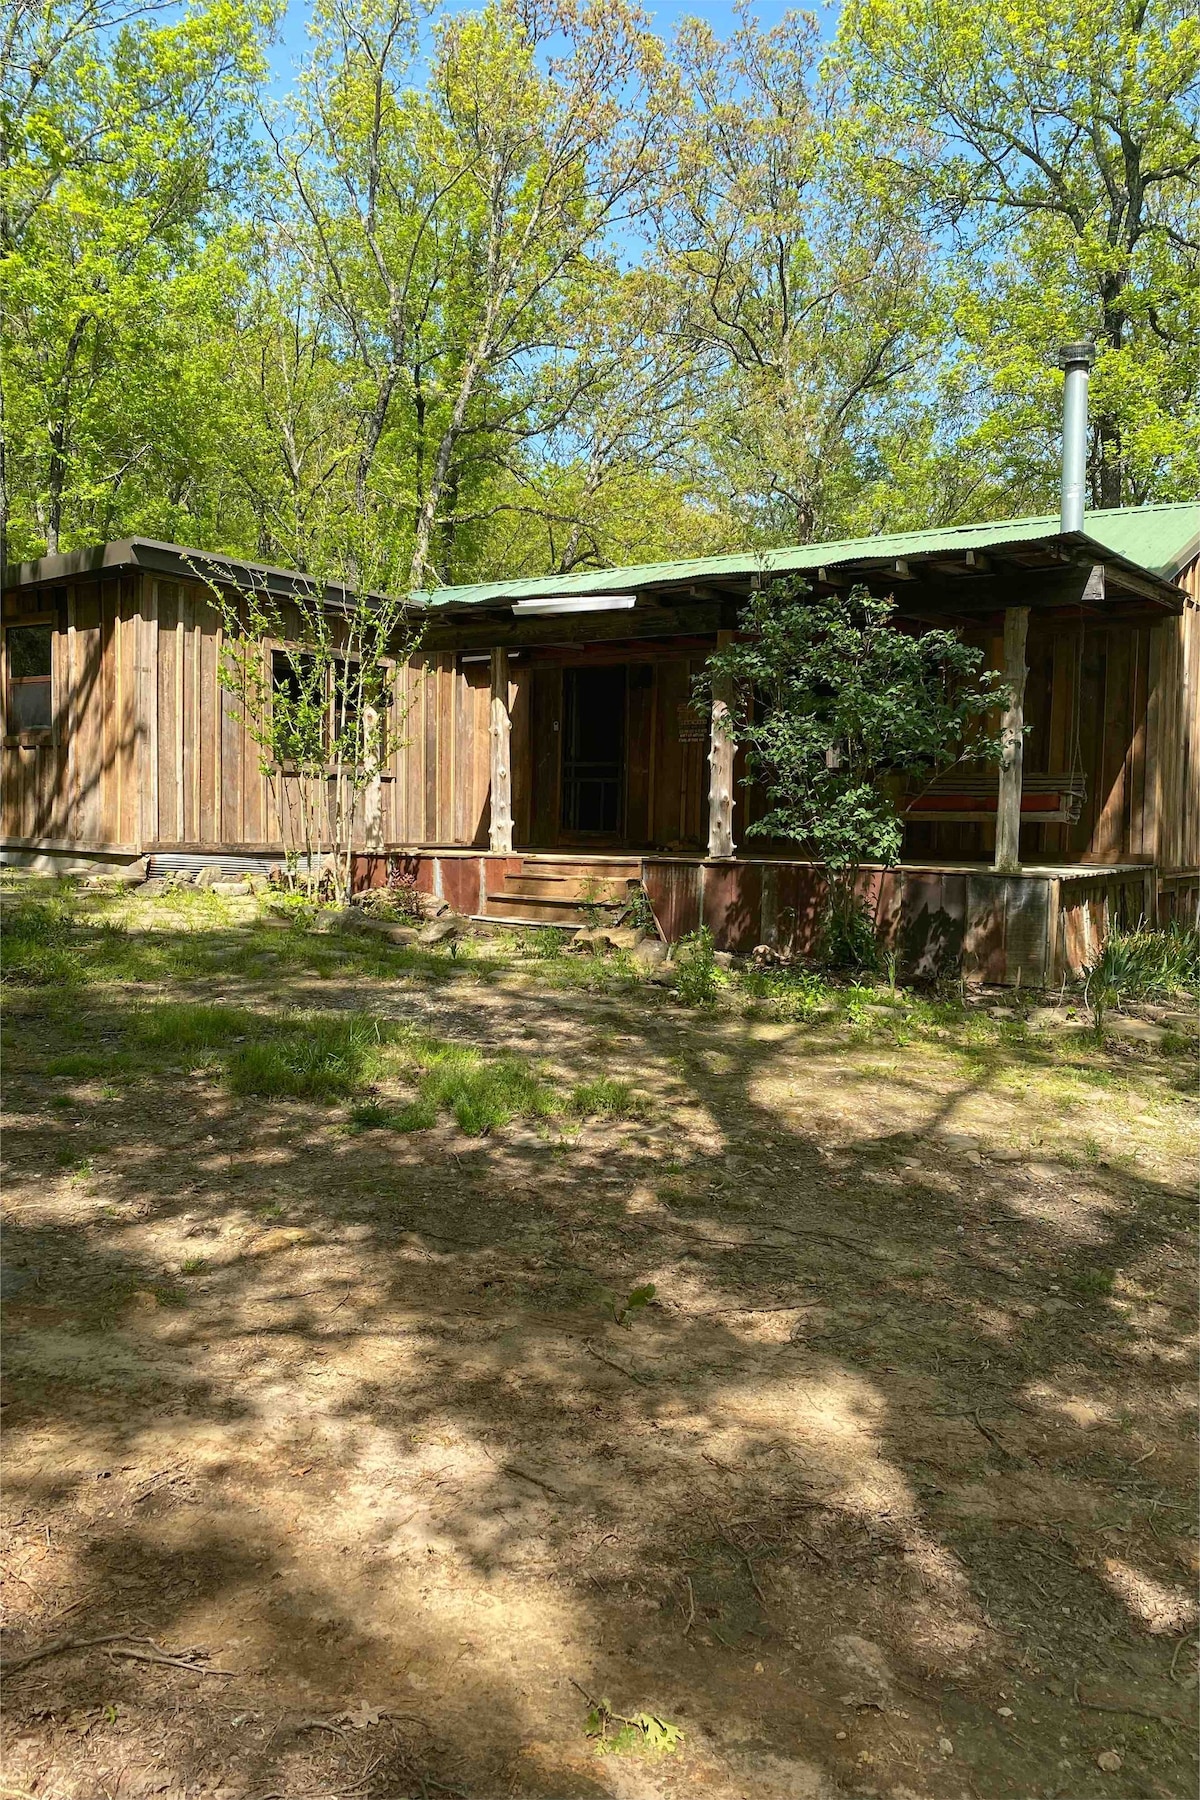 Woodchuck Acres Cabin - Seclusion Meets Adventure